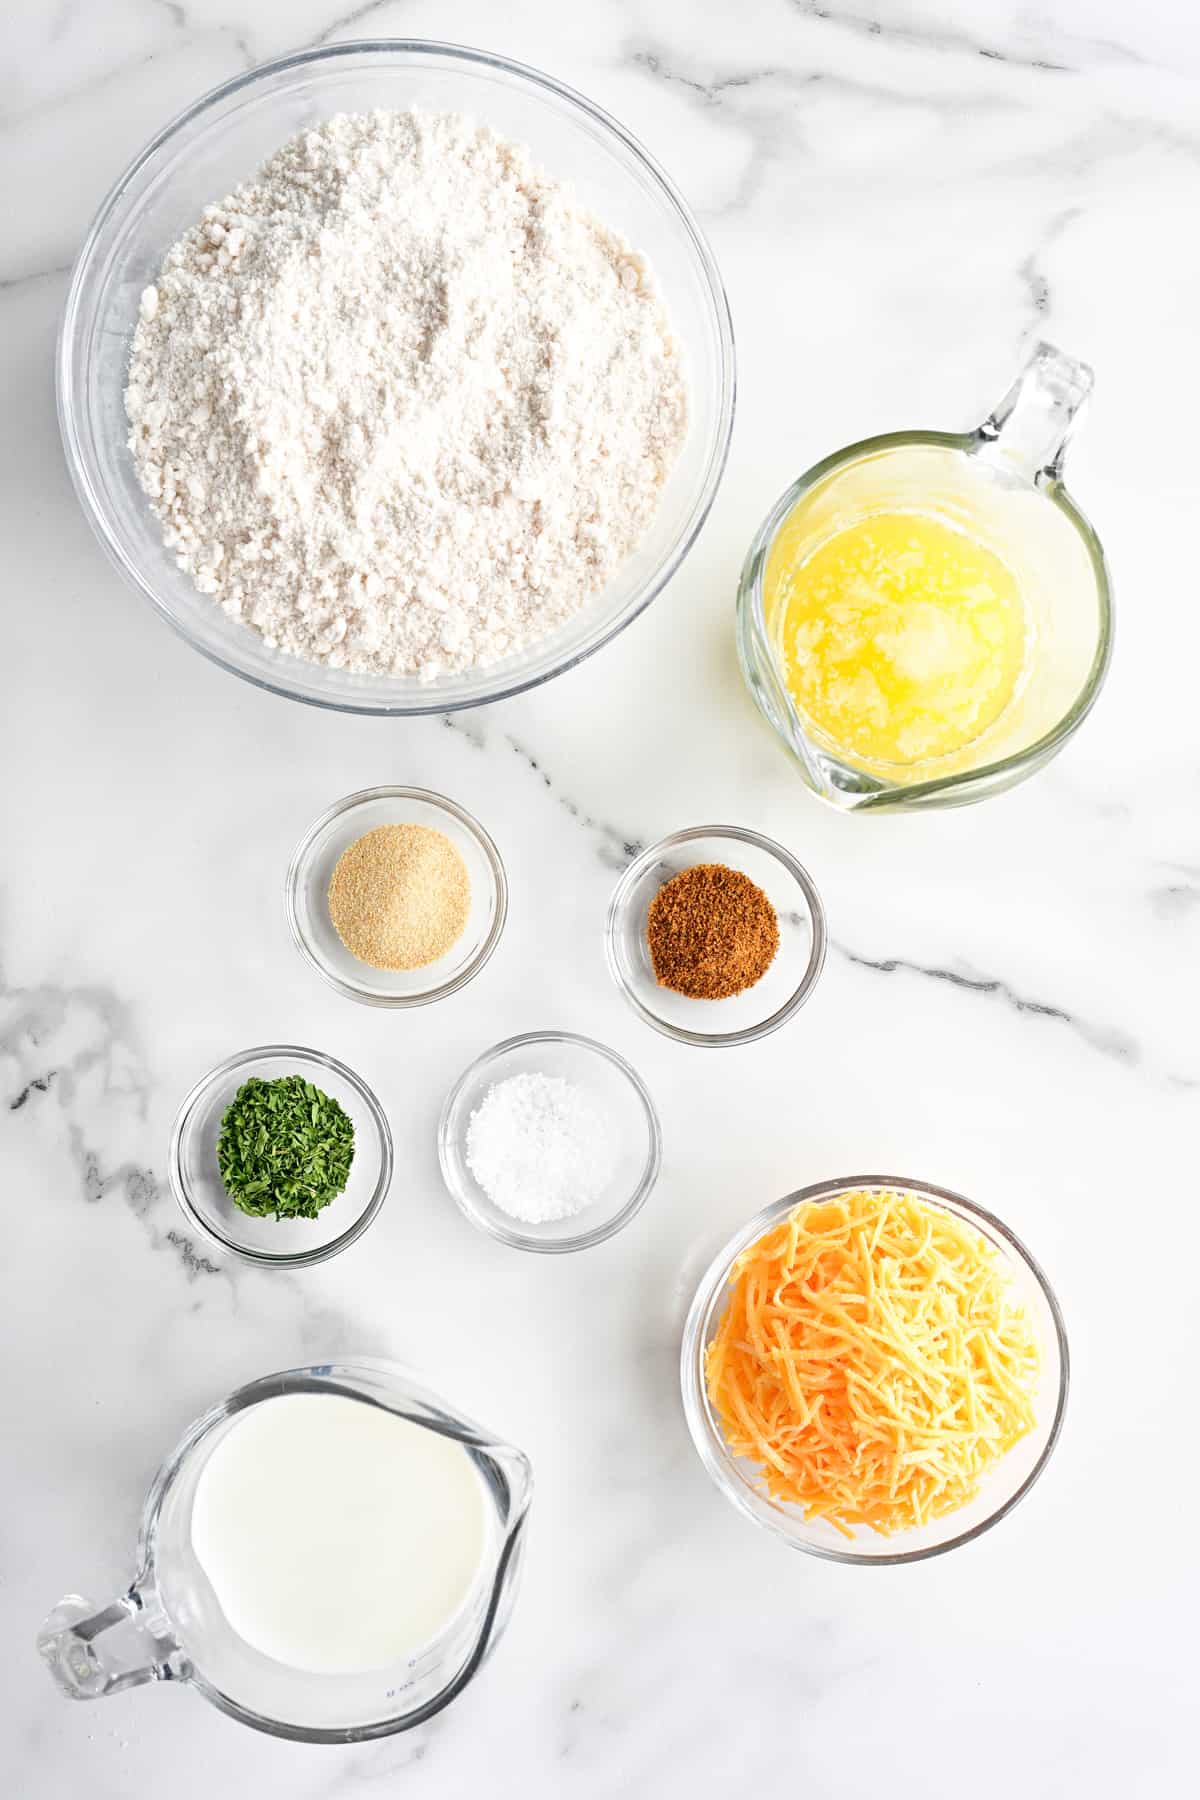 Ingredients in bowls on a white marble countertop.